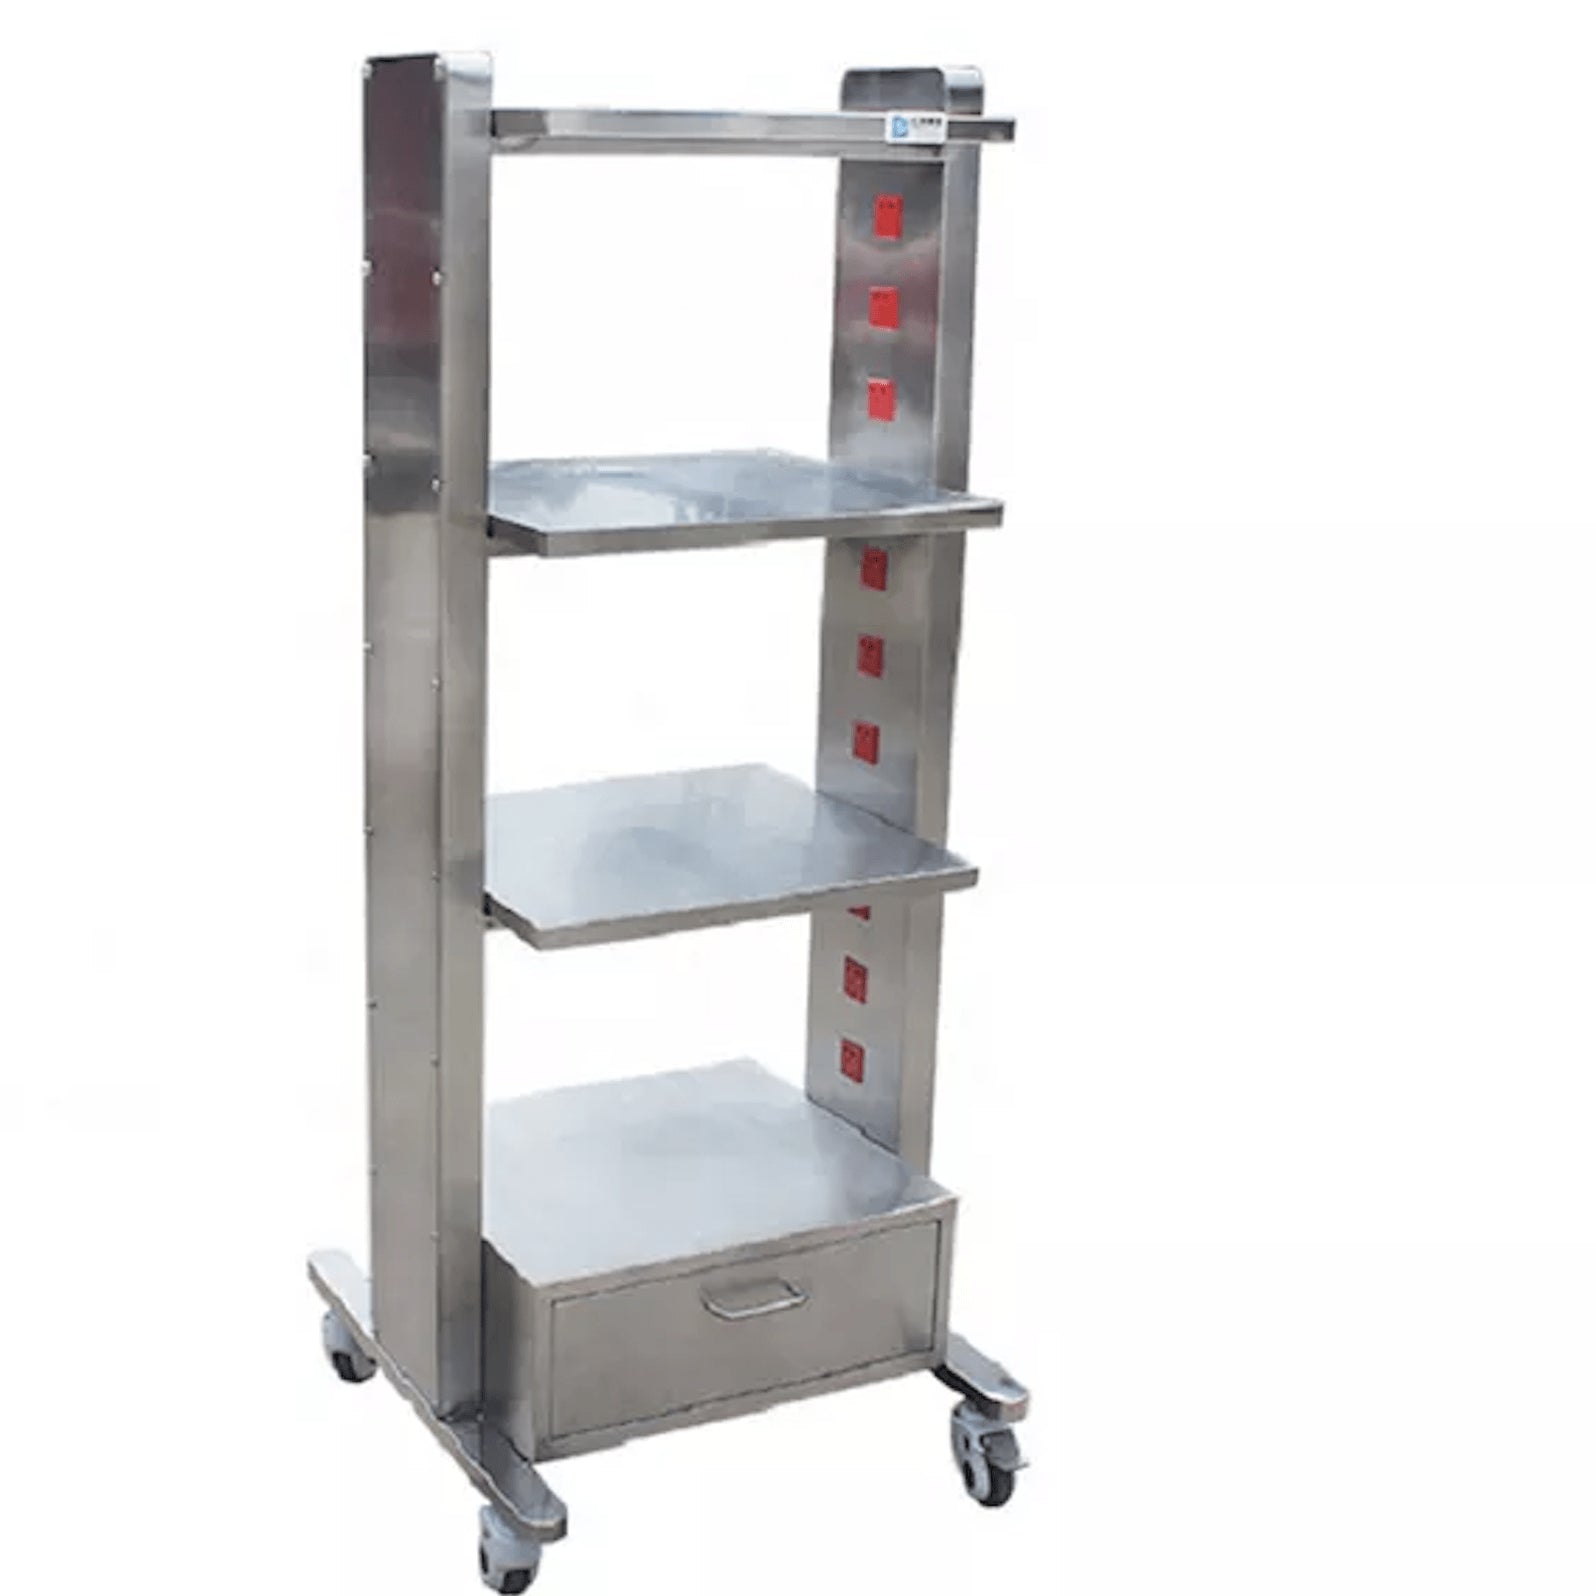 Multi-Layer Equipment Bearing Cart with Socket and wheels in hospital - Pet medical equipment